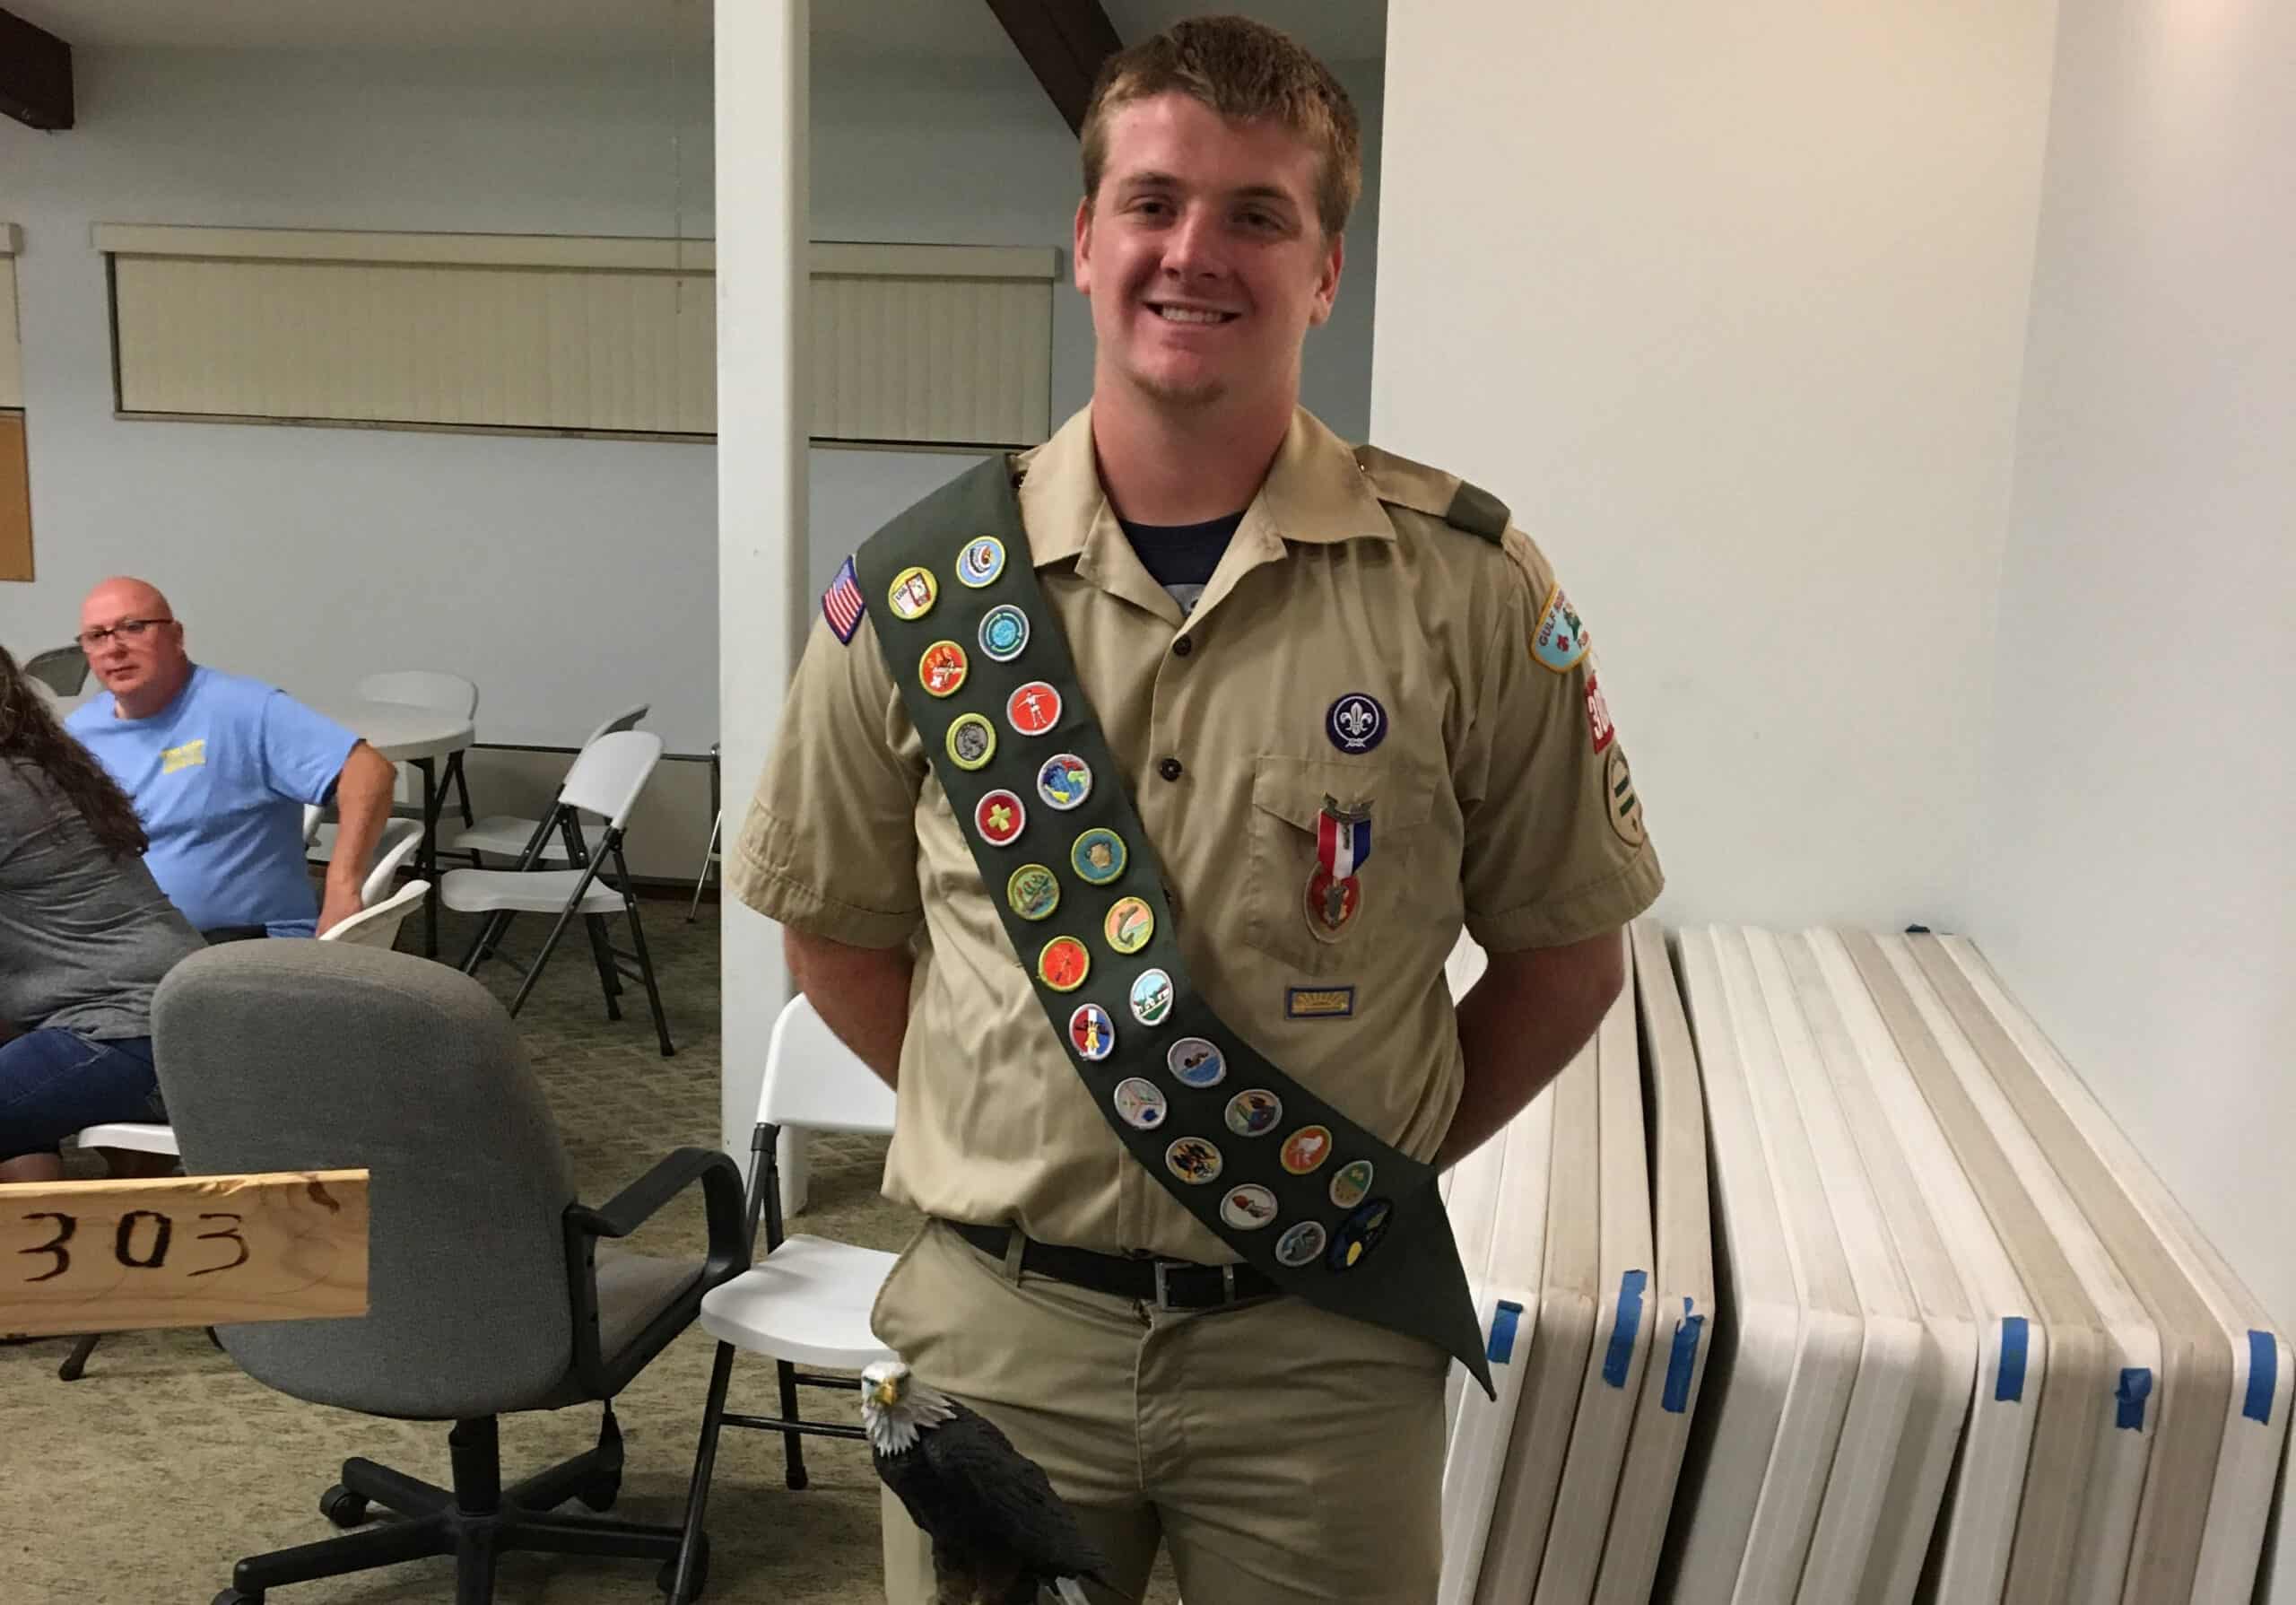 Kyle Manuel at the Eagle Scout ceremony